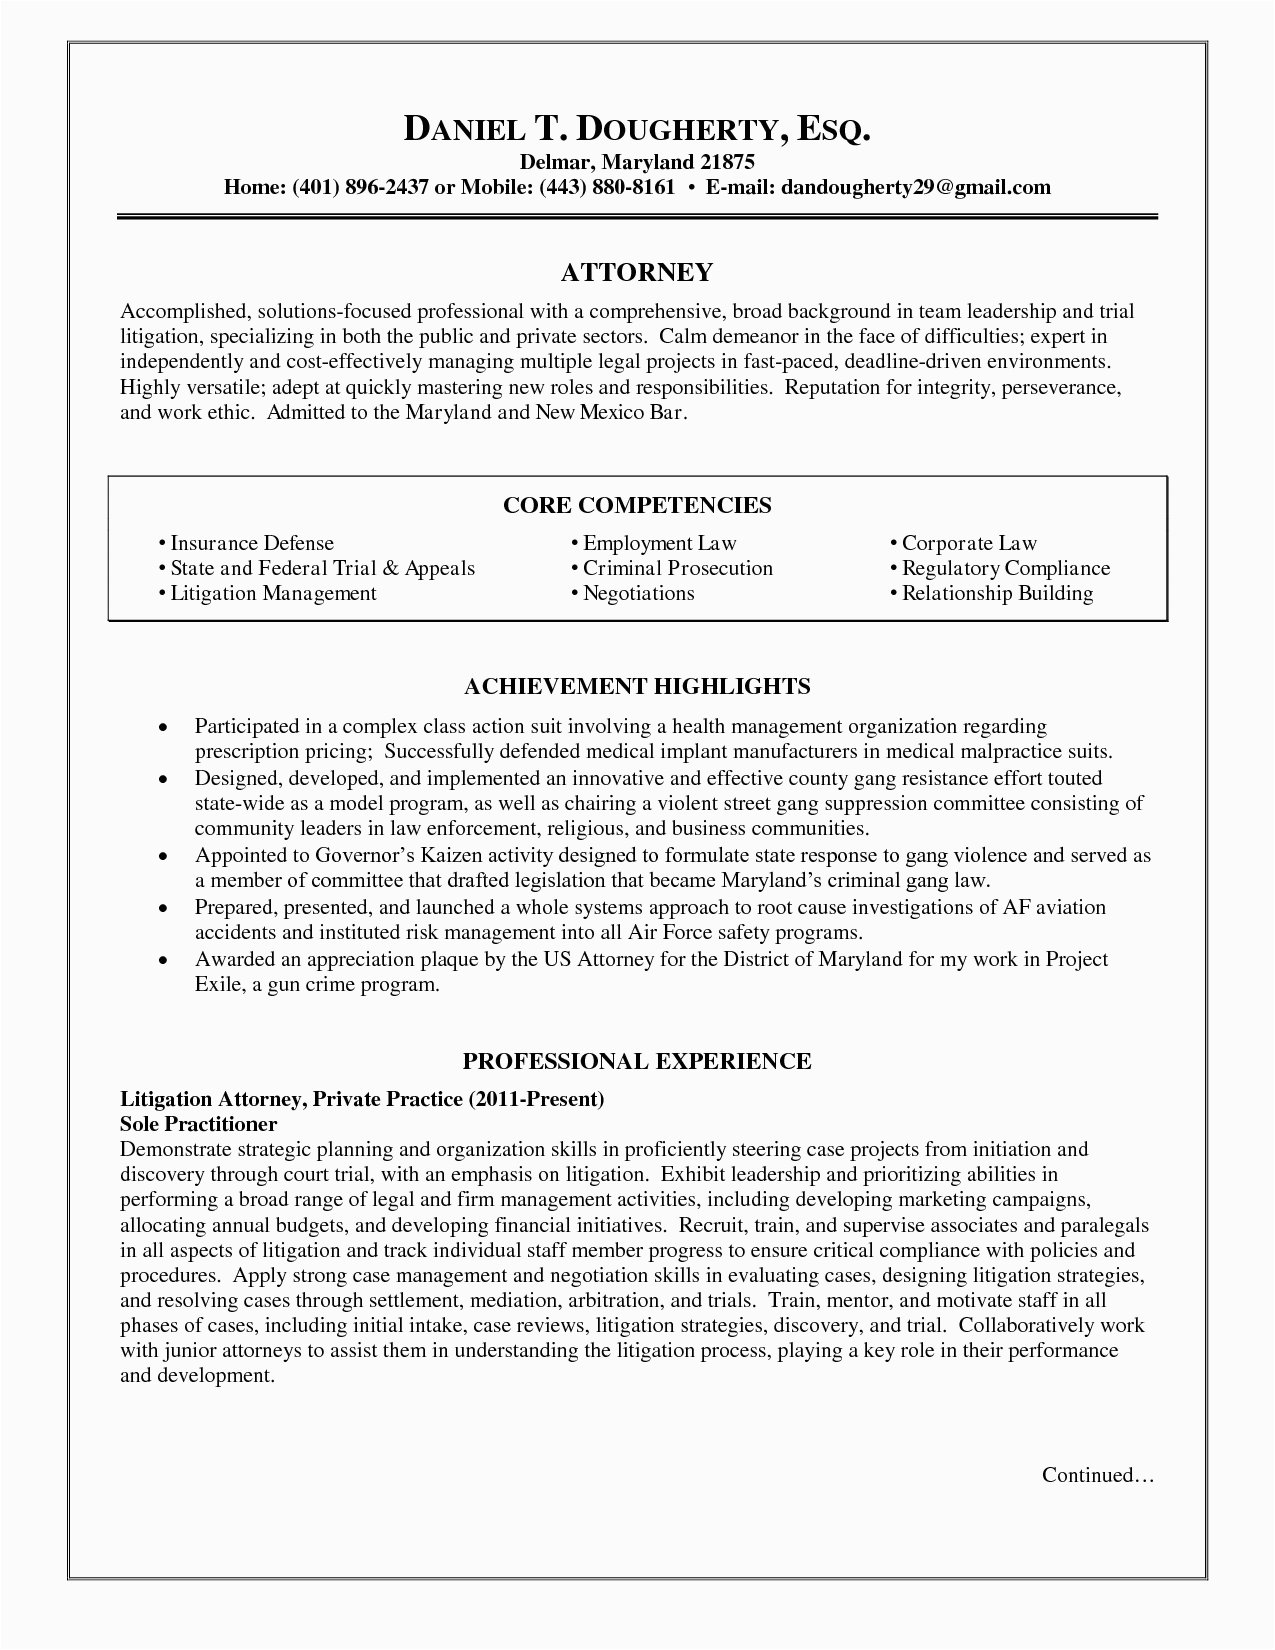 Labor and Employment attorney Resume Sample 15 Great Litigation attorney Resume Sample 15